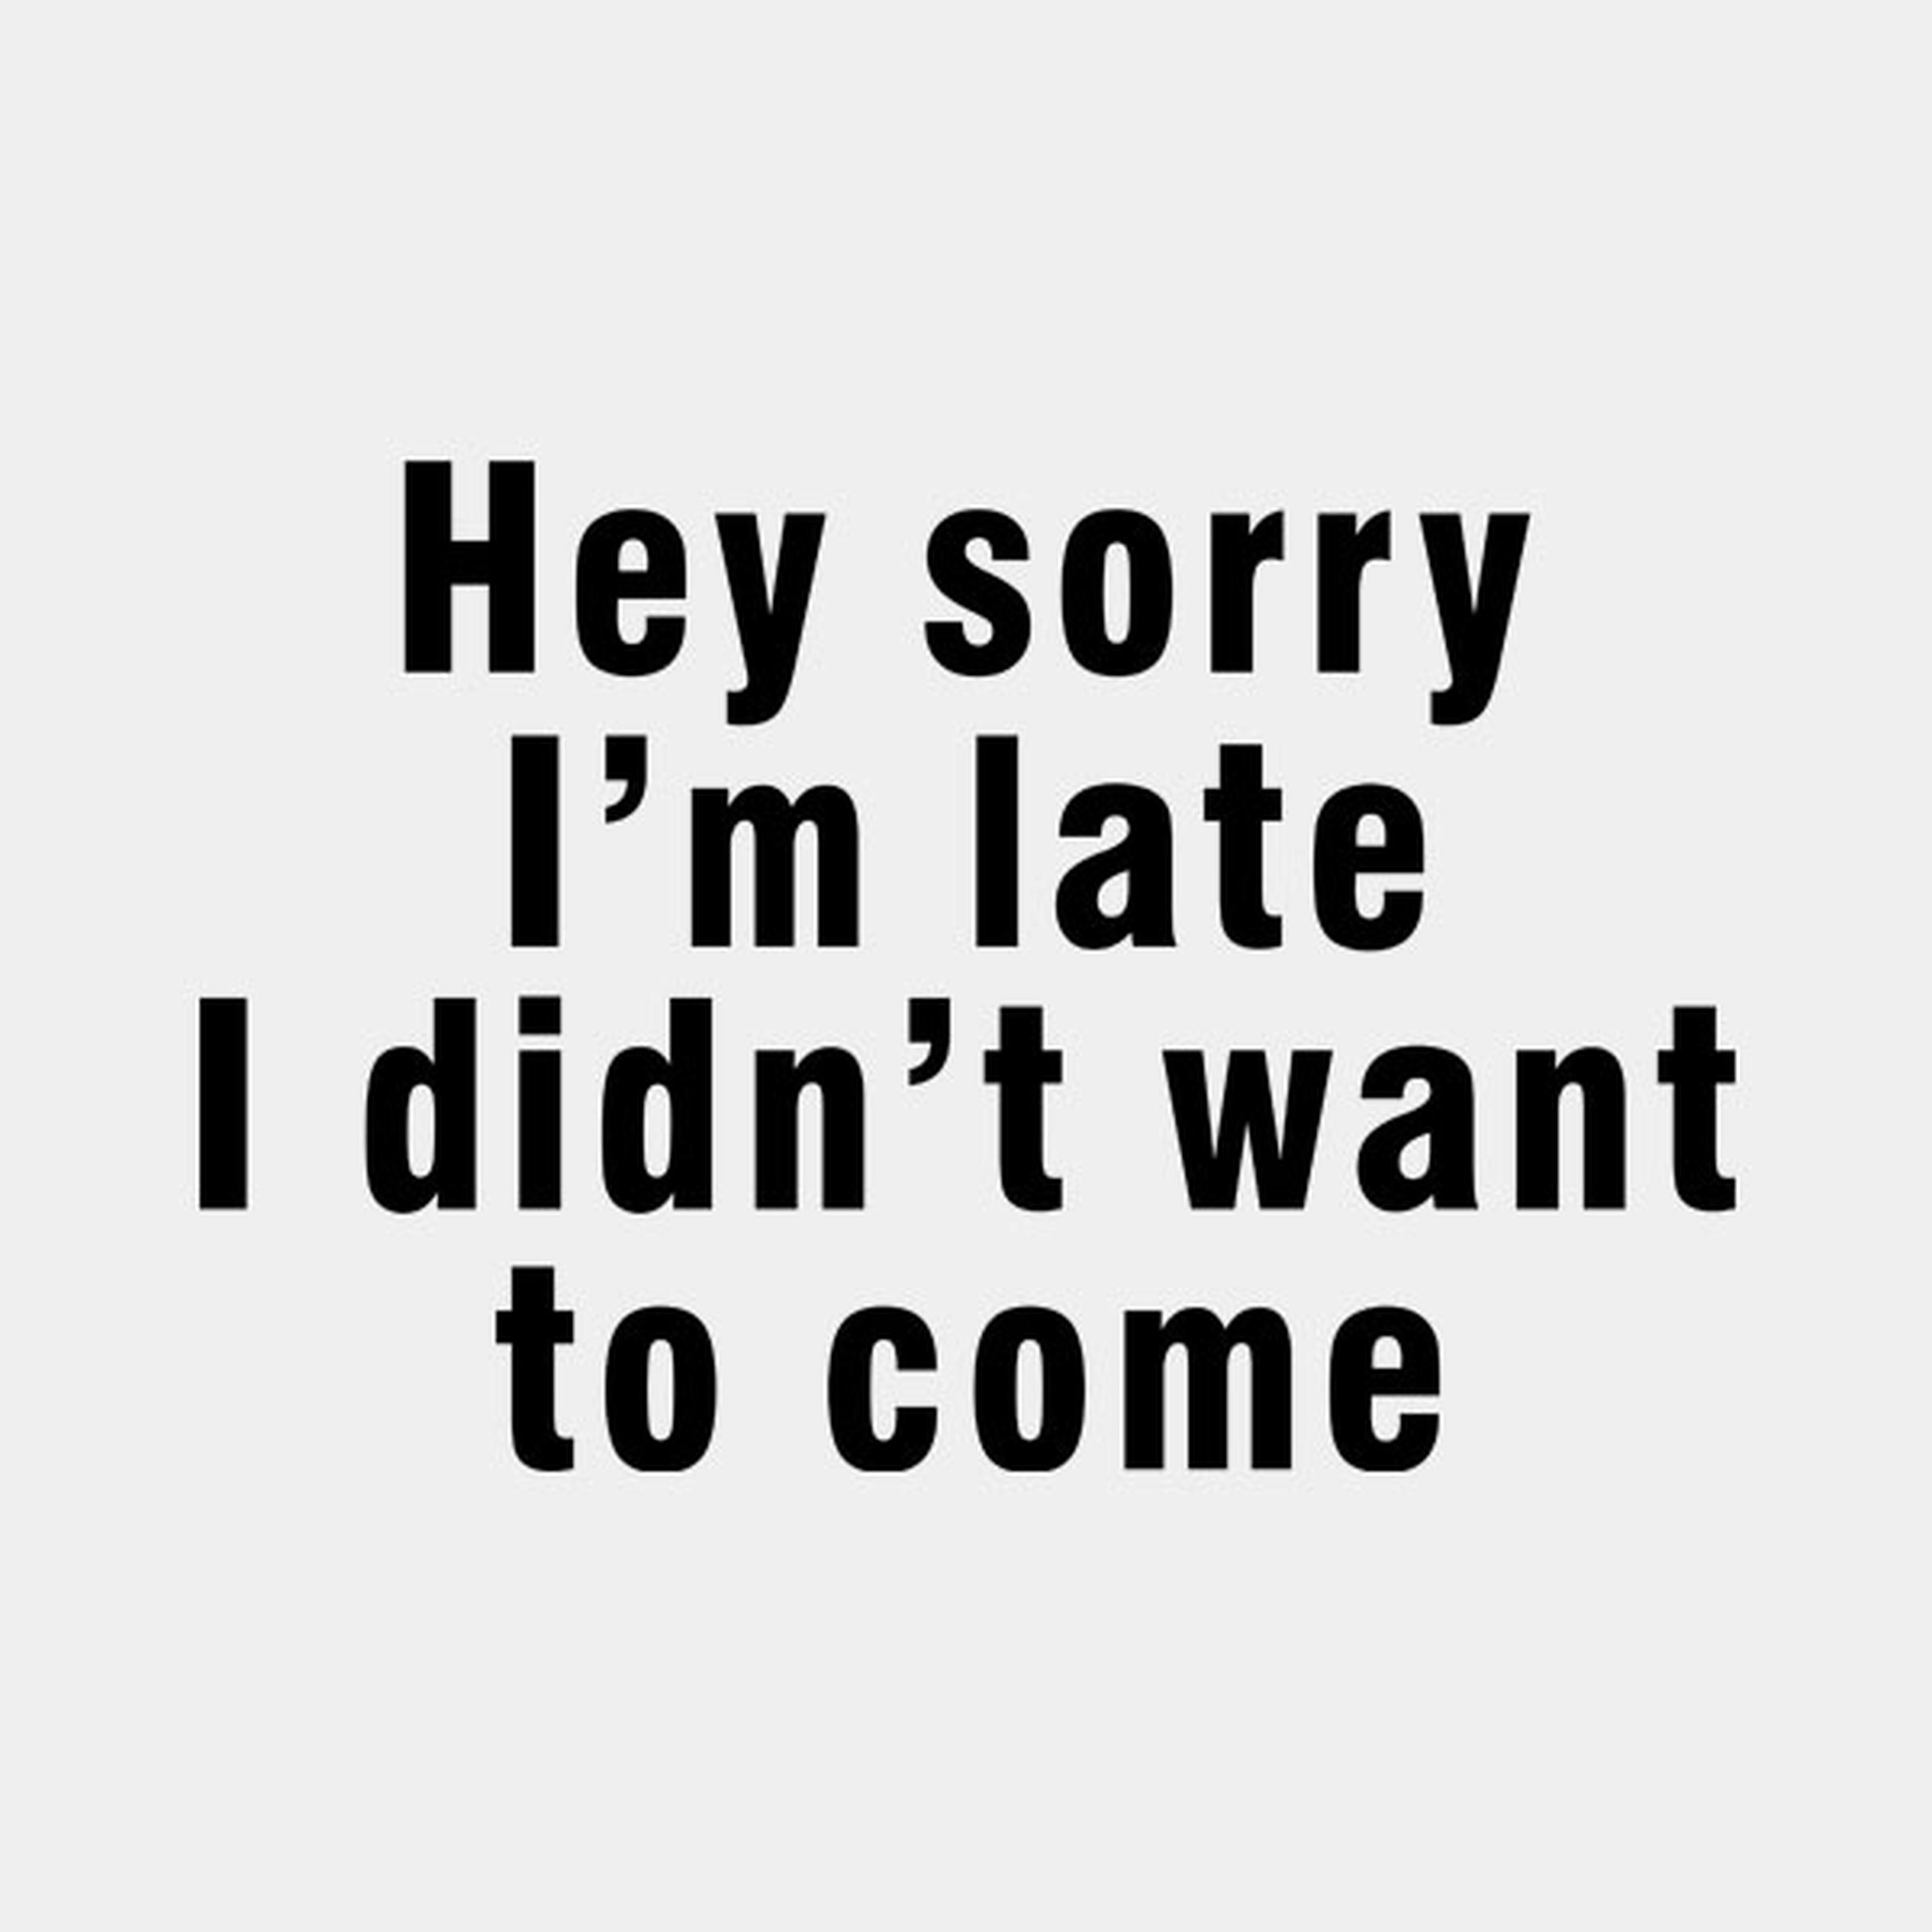 Sorry I'm late, I didn't want to come - T-shirt